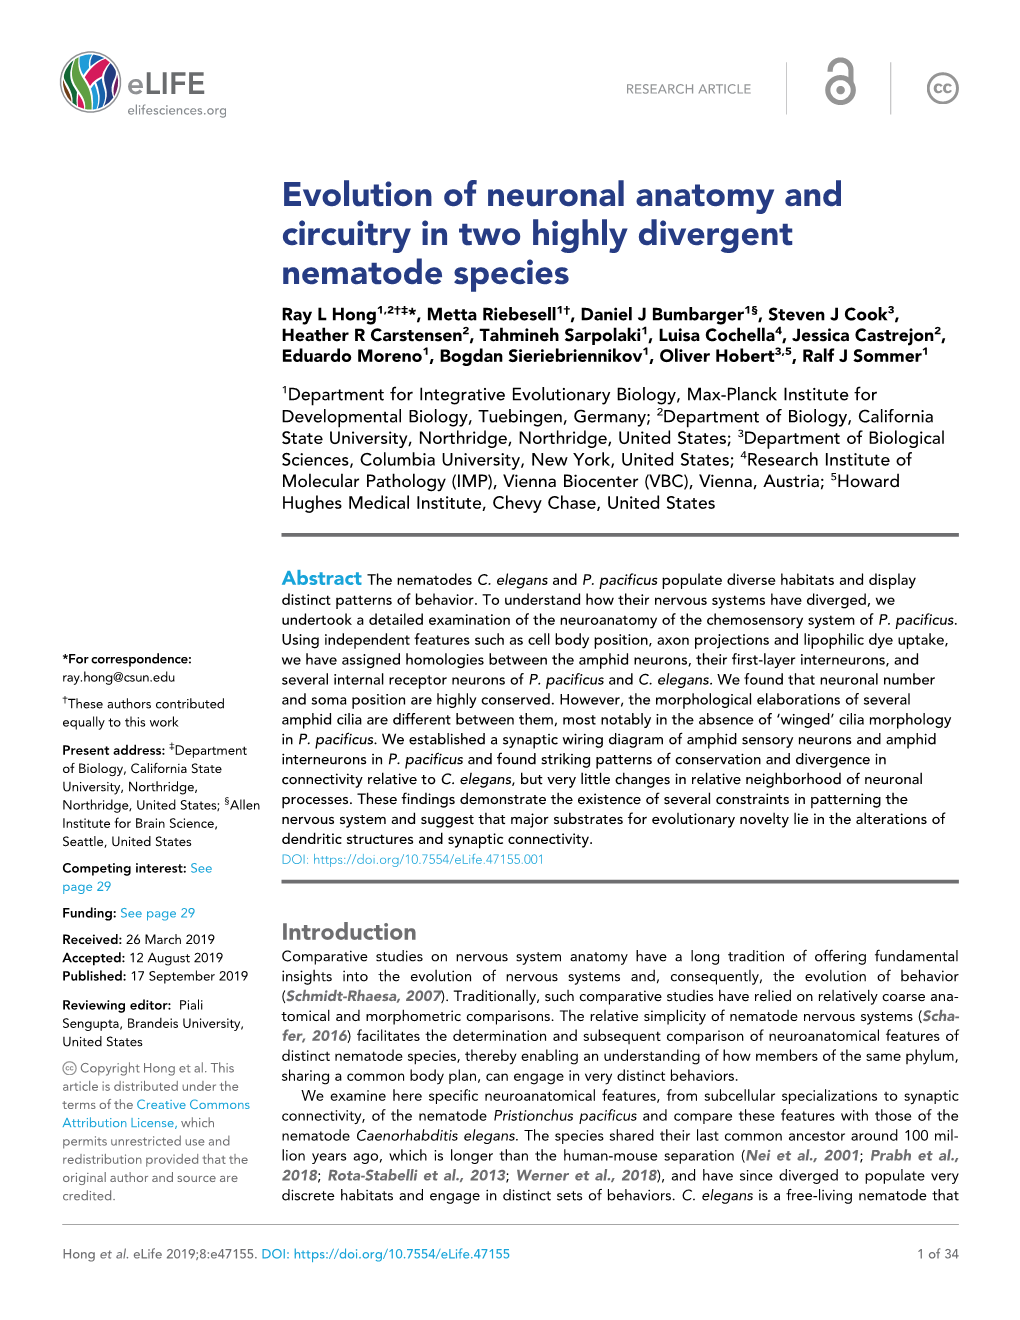 Evolution of Neuronal Anatomy and Circuitry in Two Highly Divergent